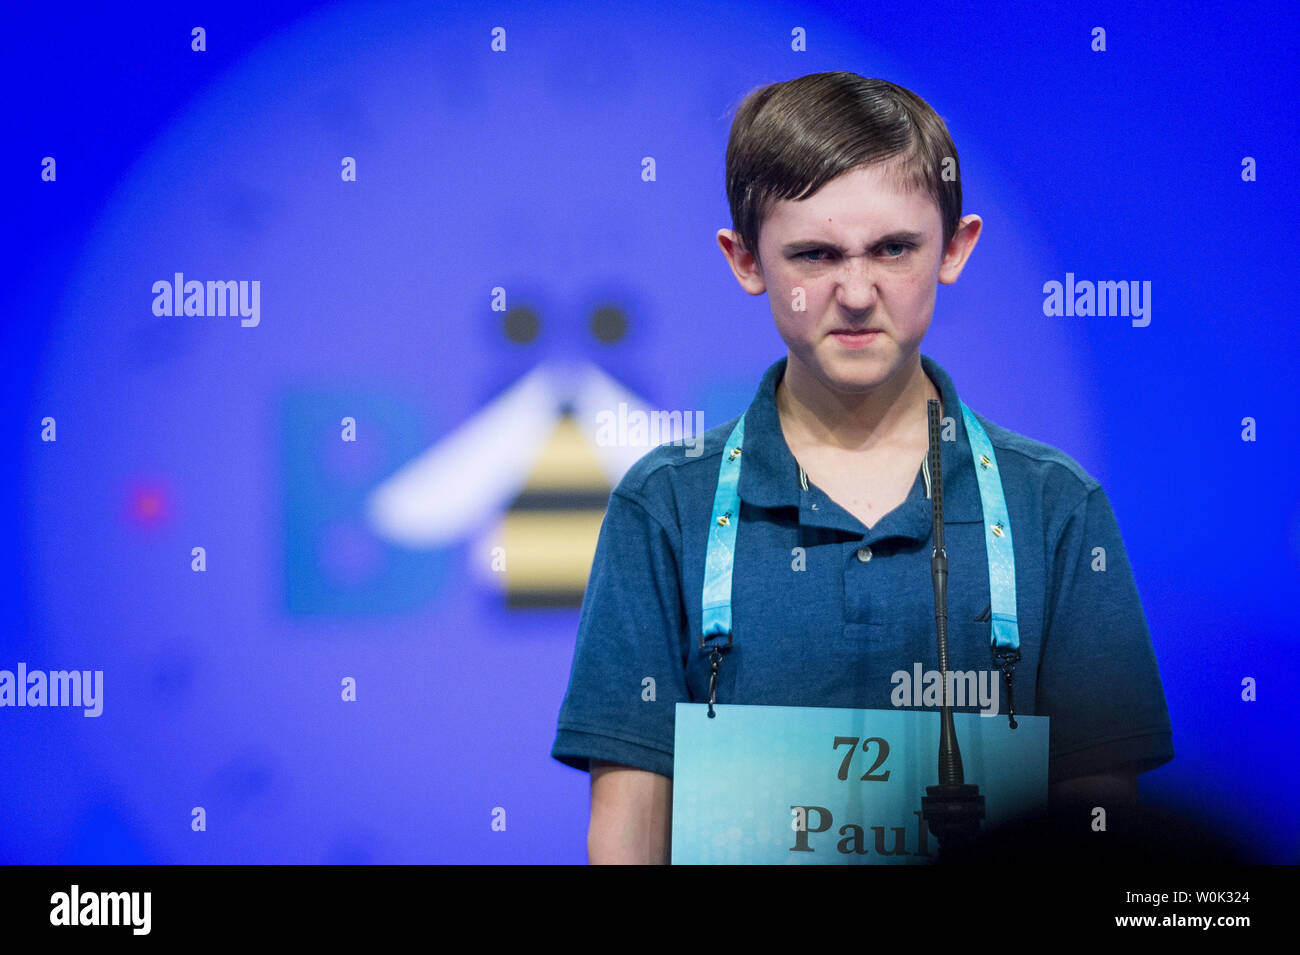 Paul Hamrick, 14, from Monterey, California, participates in the final round of the 2018 Scripps National Spelling Bee on May 31, 2018 in Oxon Hill, Maryland. The Bee was expanded this year and now spans three days with 519 spellers. Forty-one spellers advanced to the final round.  Photo by Pete Marovich/UPI Stock Photo